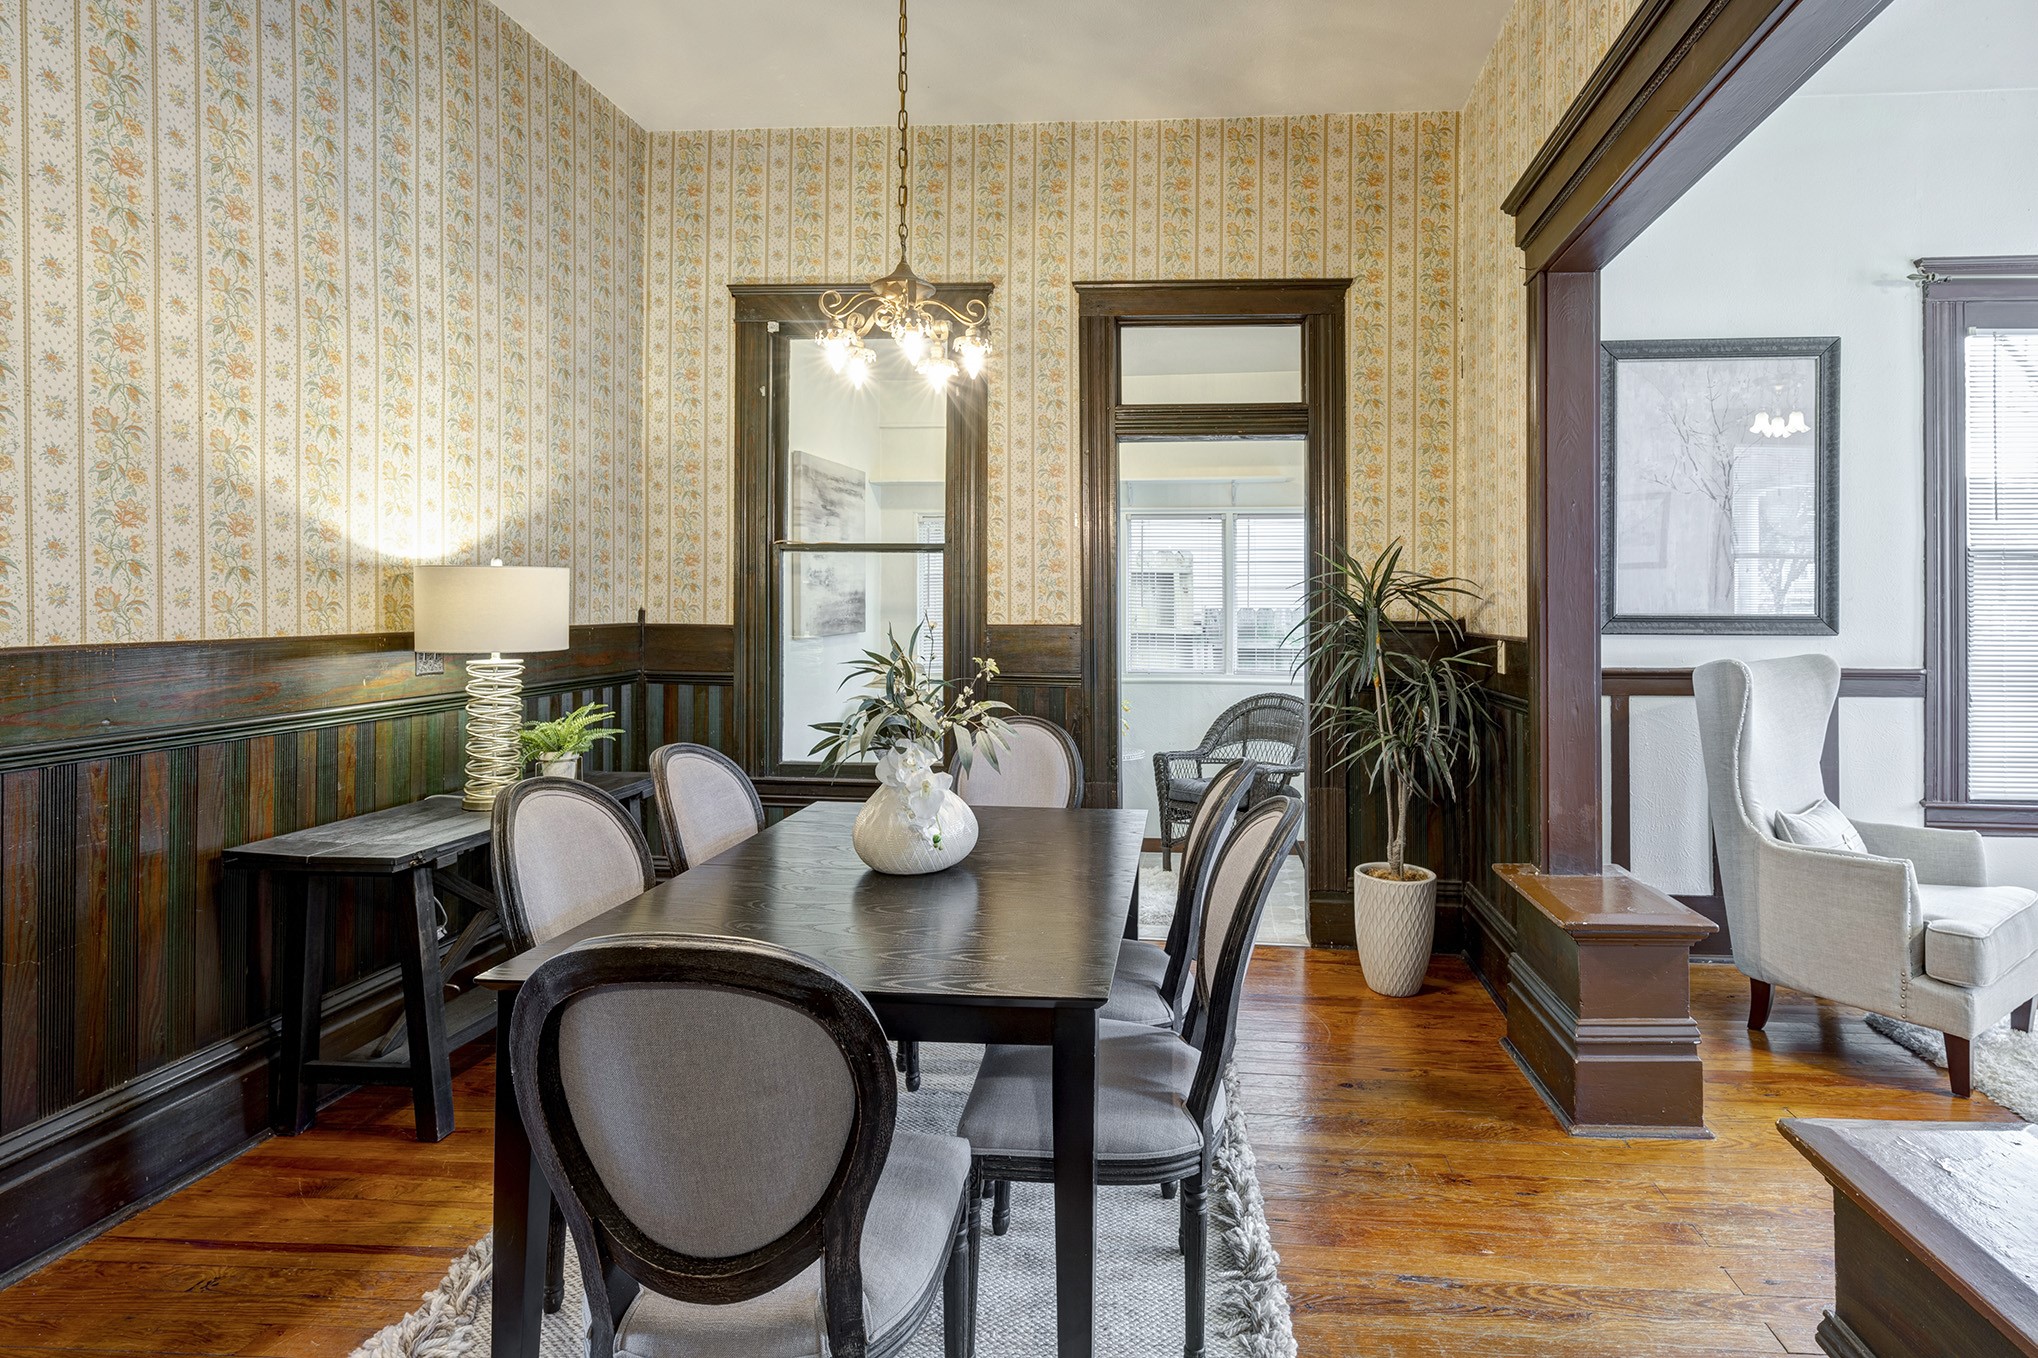 Beadboard wraps around the formal dining room with period-style wallpaper.